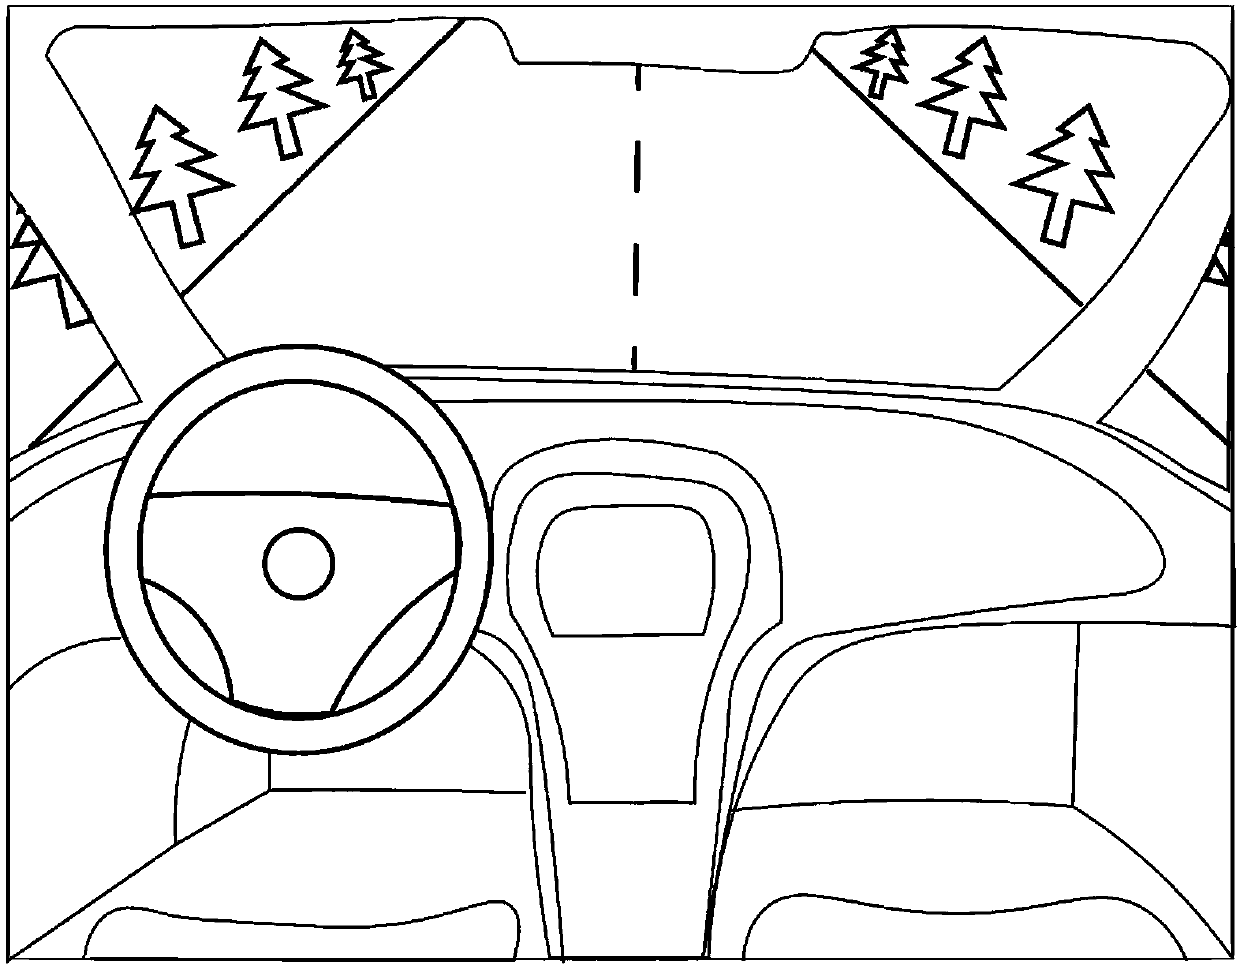 Car transparent A column device capable of adjusting height to adapt to eye point of driver